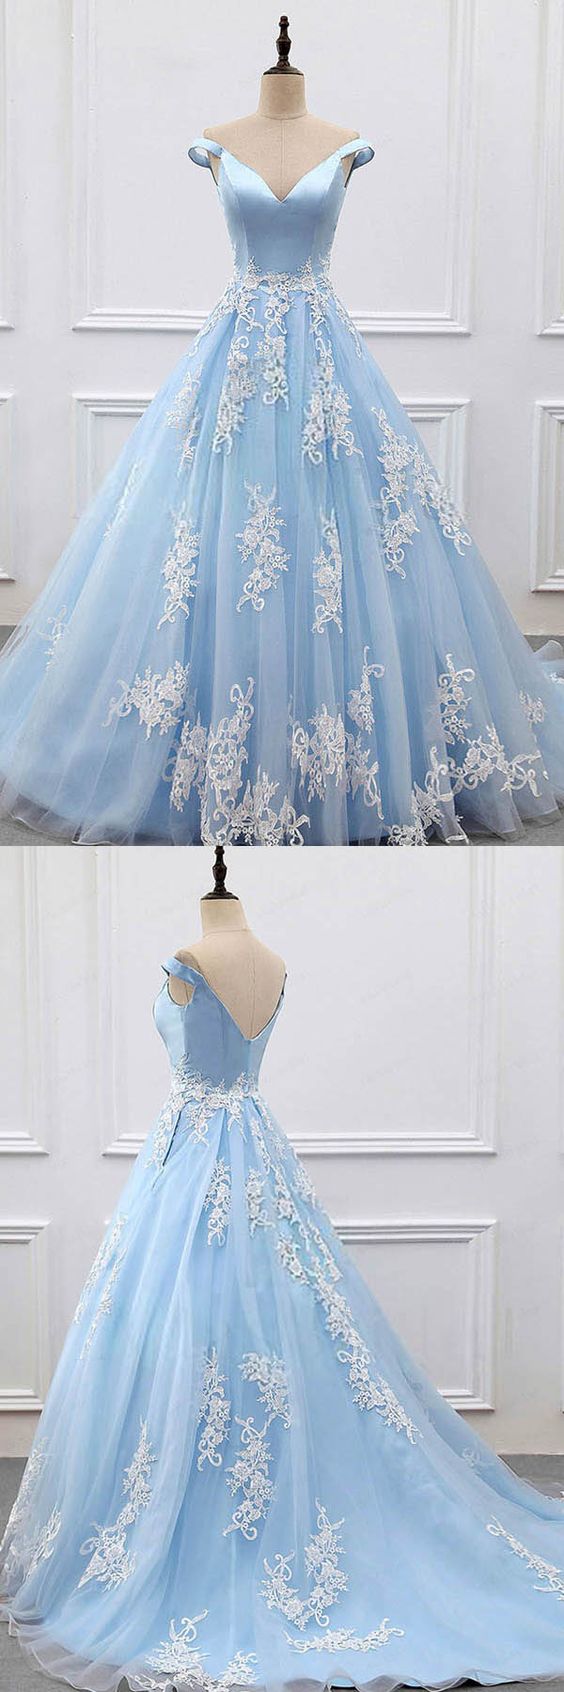 Ball Gown Off-the-shoulder Court Train Blue Tulle Prom Dress M0818